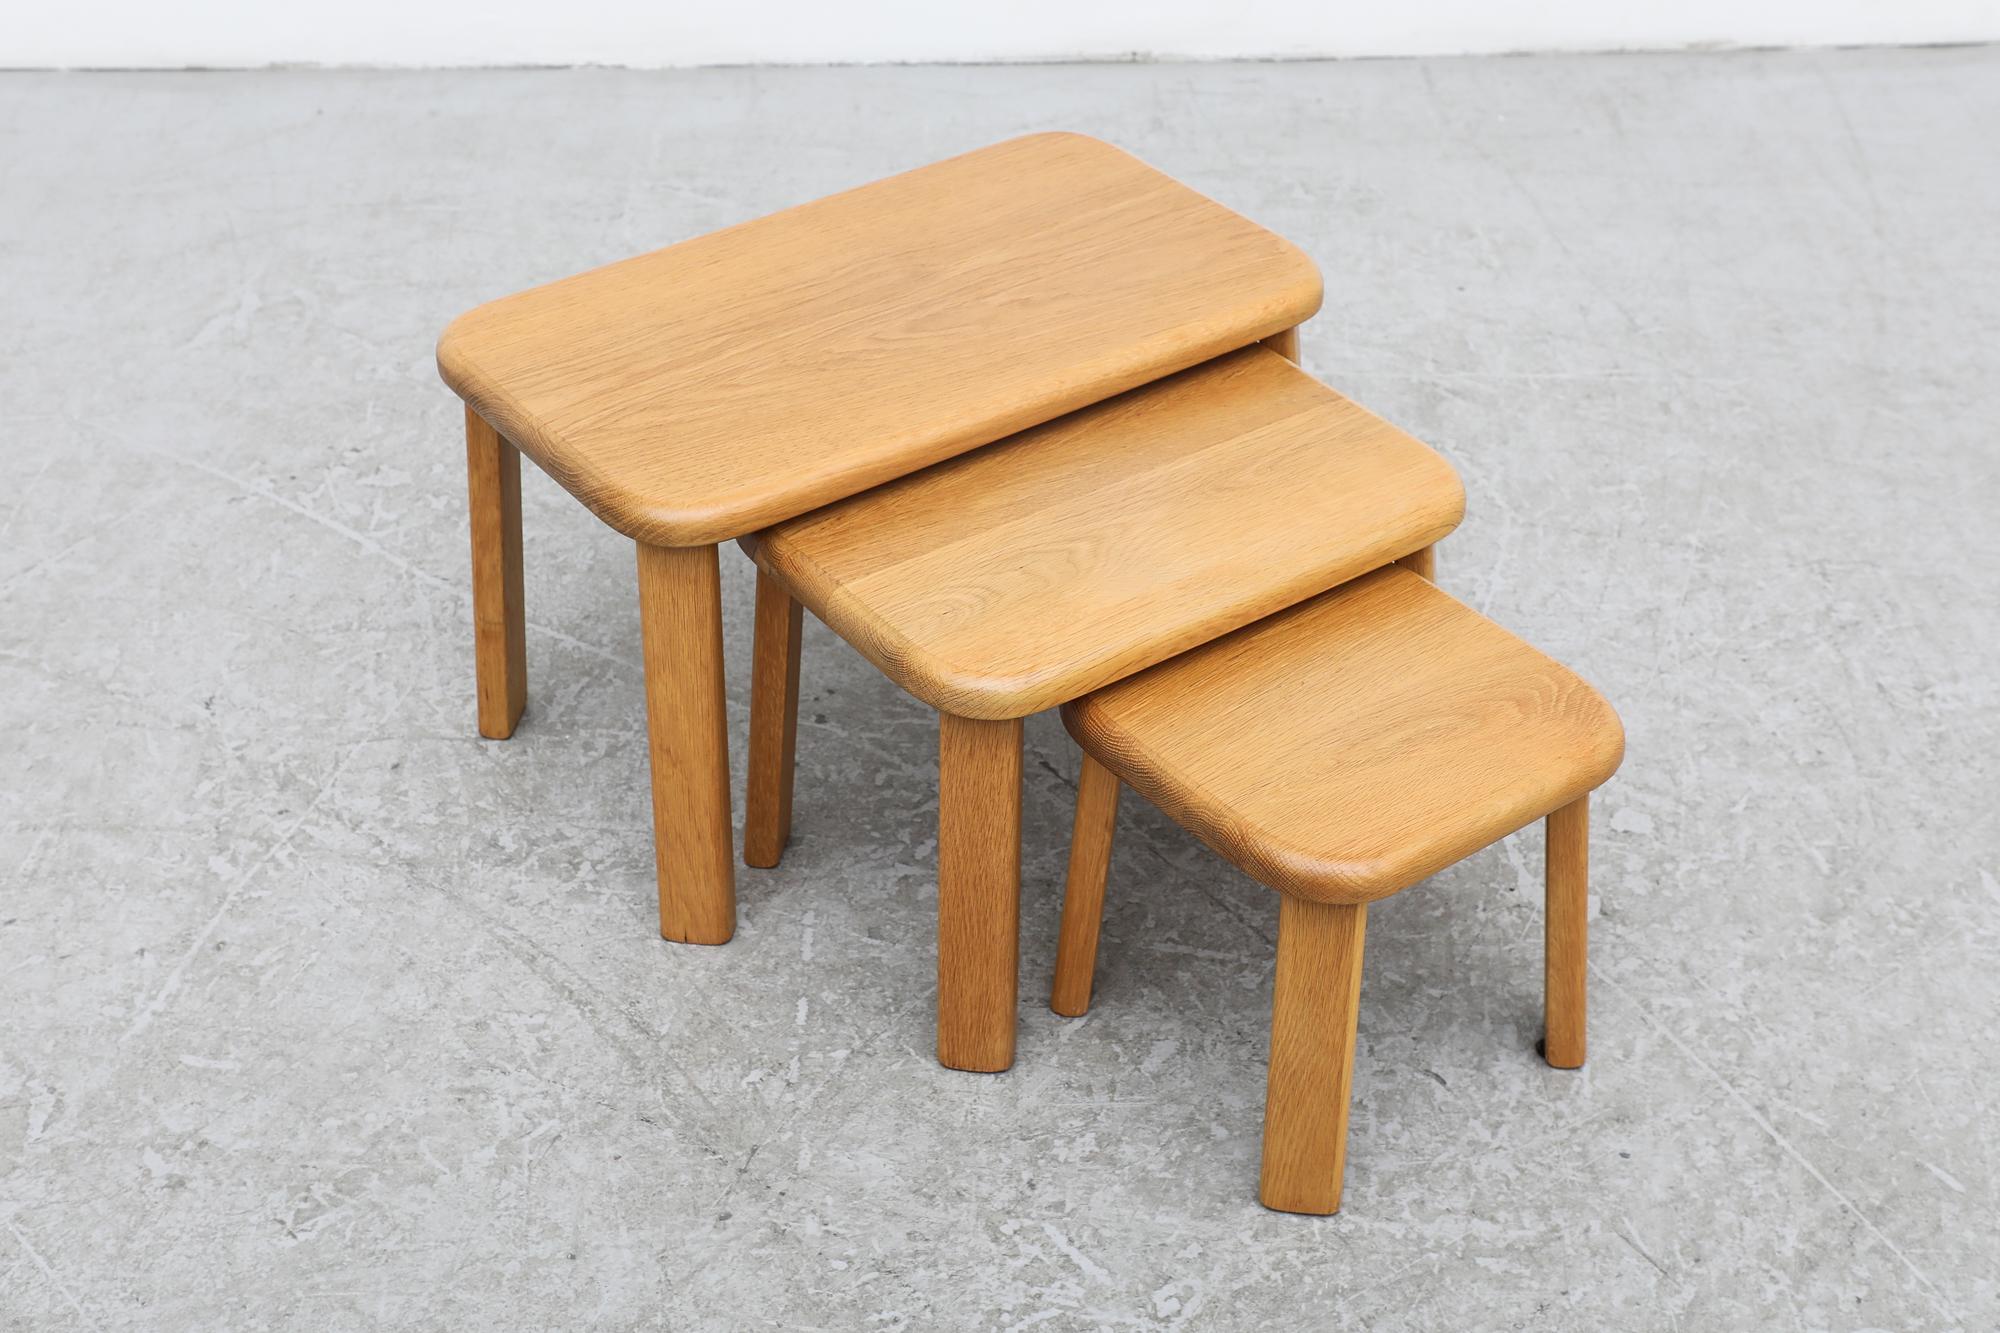 Set of 3 Charlotte Perriand Inspired Natural Oak Nesting Tables w/ Rounded Edges For Sale 6